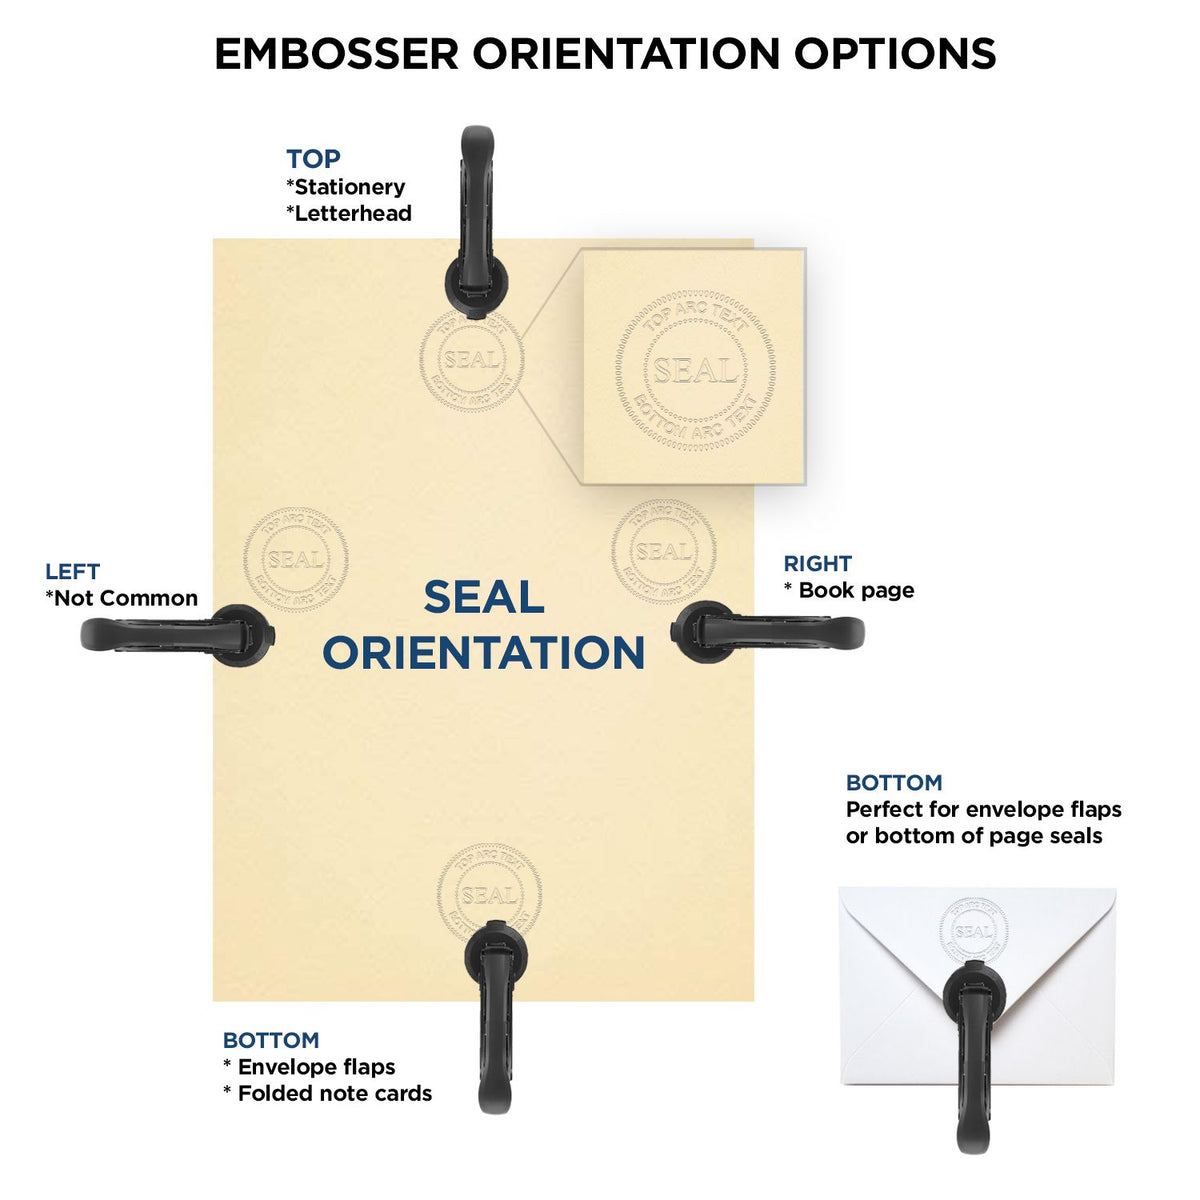 An infographic for the Gift Massachusetts Land Surveyor Seal showing embosser orientation, this is showing examples of a top, bottom, right and left insert.